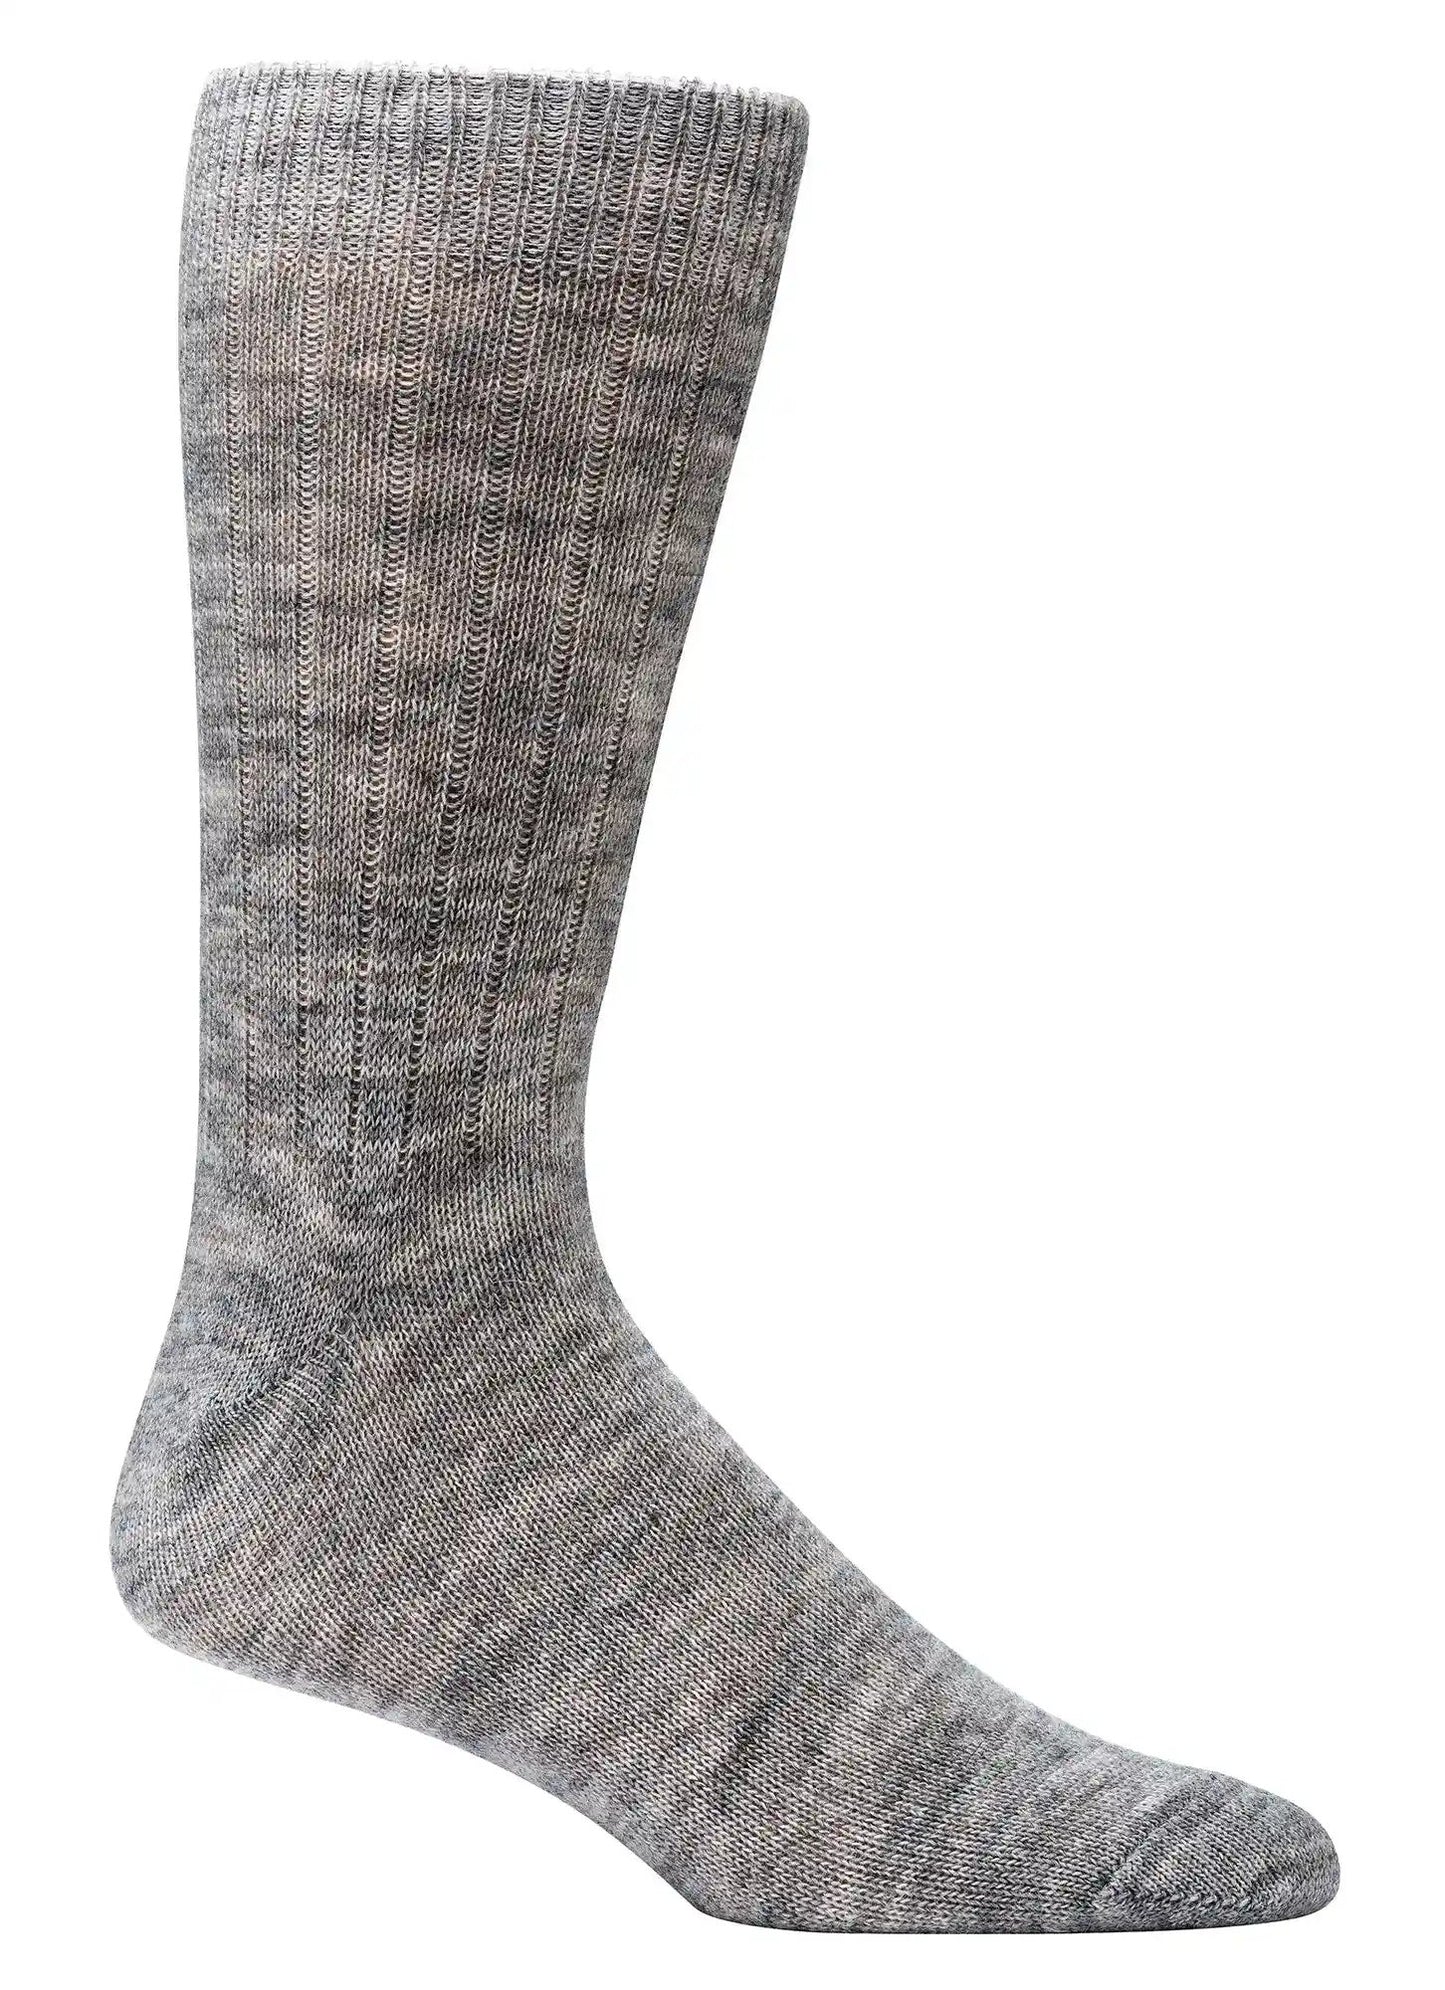 2 or 4 pairs of warm wool socks with alpaca wool and sheep wool for men and women